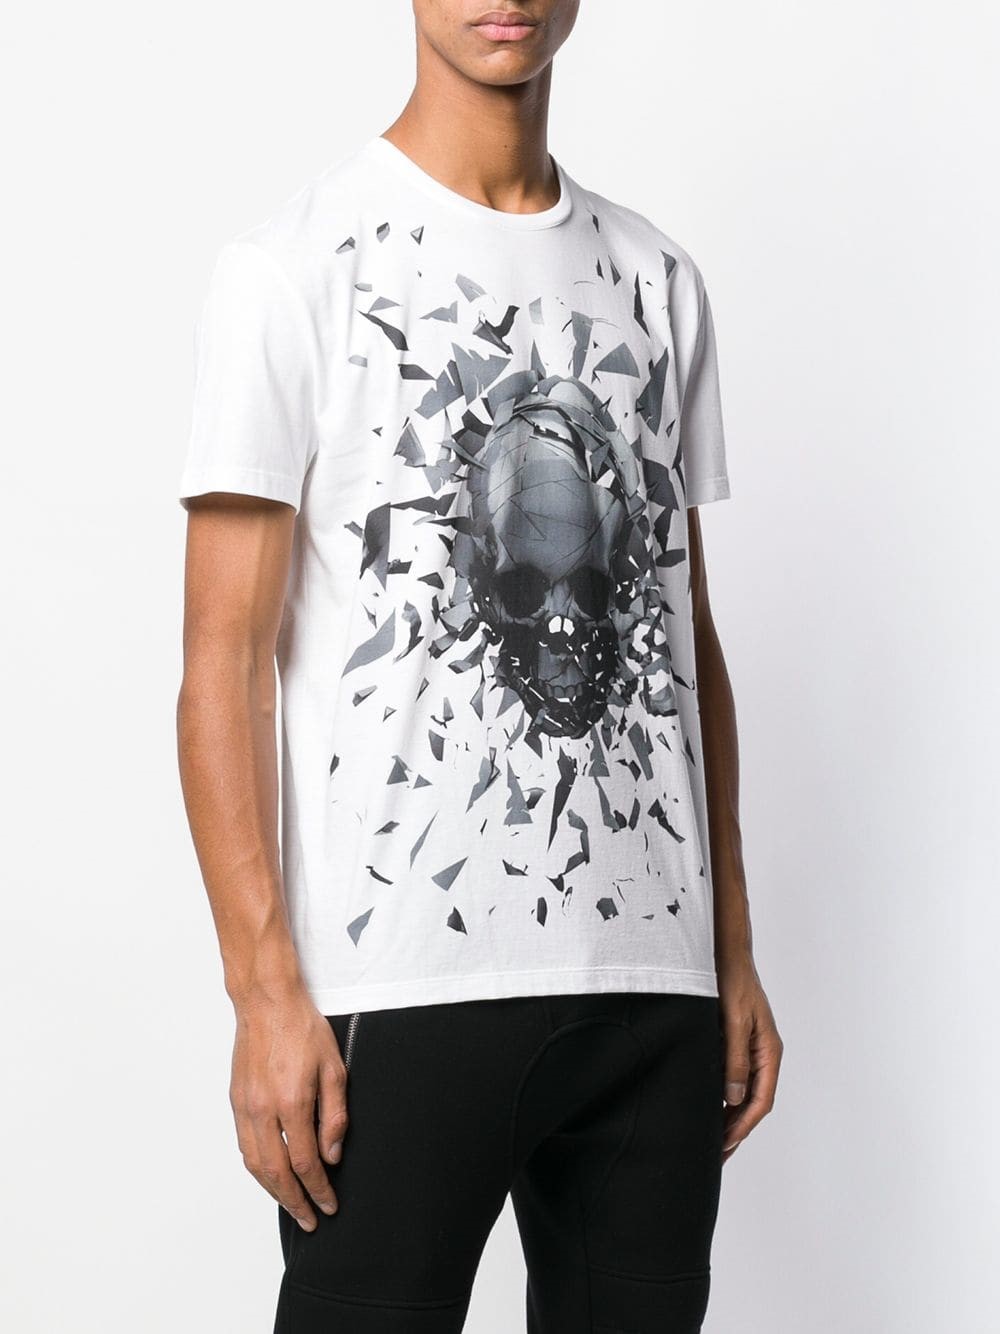 alexander mcqueen SKULL T-SHIRT available on montiboutique.com - 25909